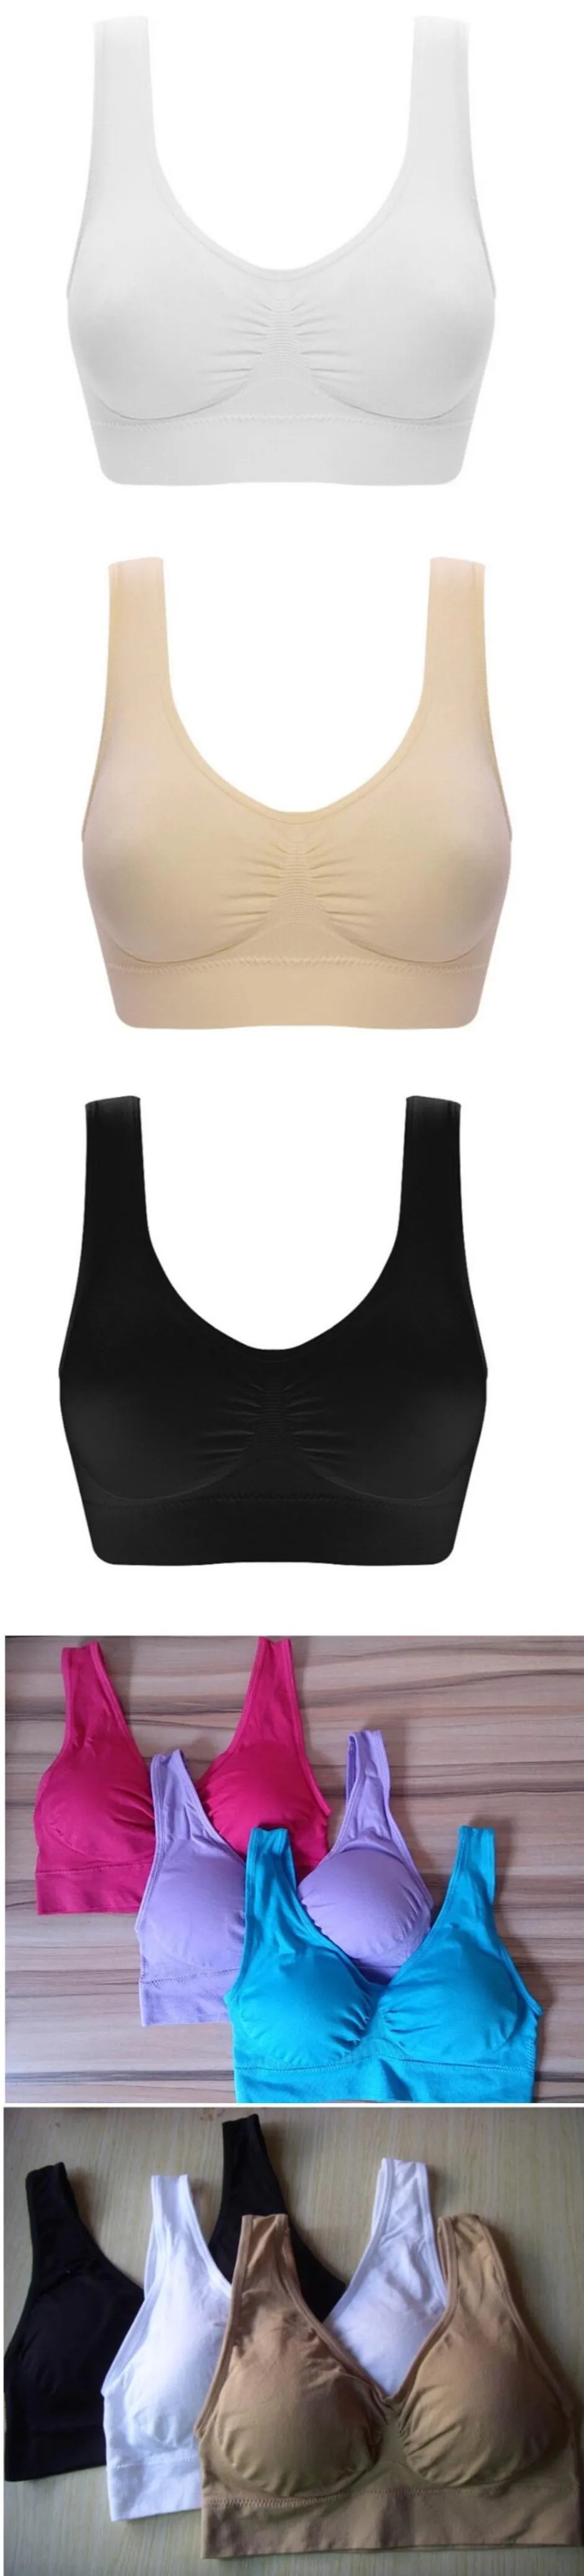 Premium Double Layer Seamless Genie Cheap Sexy Bras With Removable Pads N416  From Iklpz, $33.49